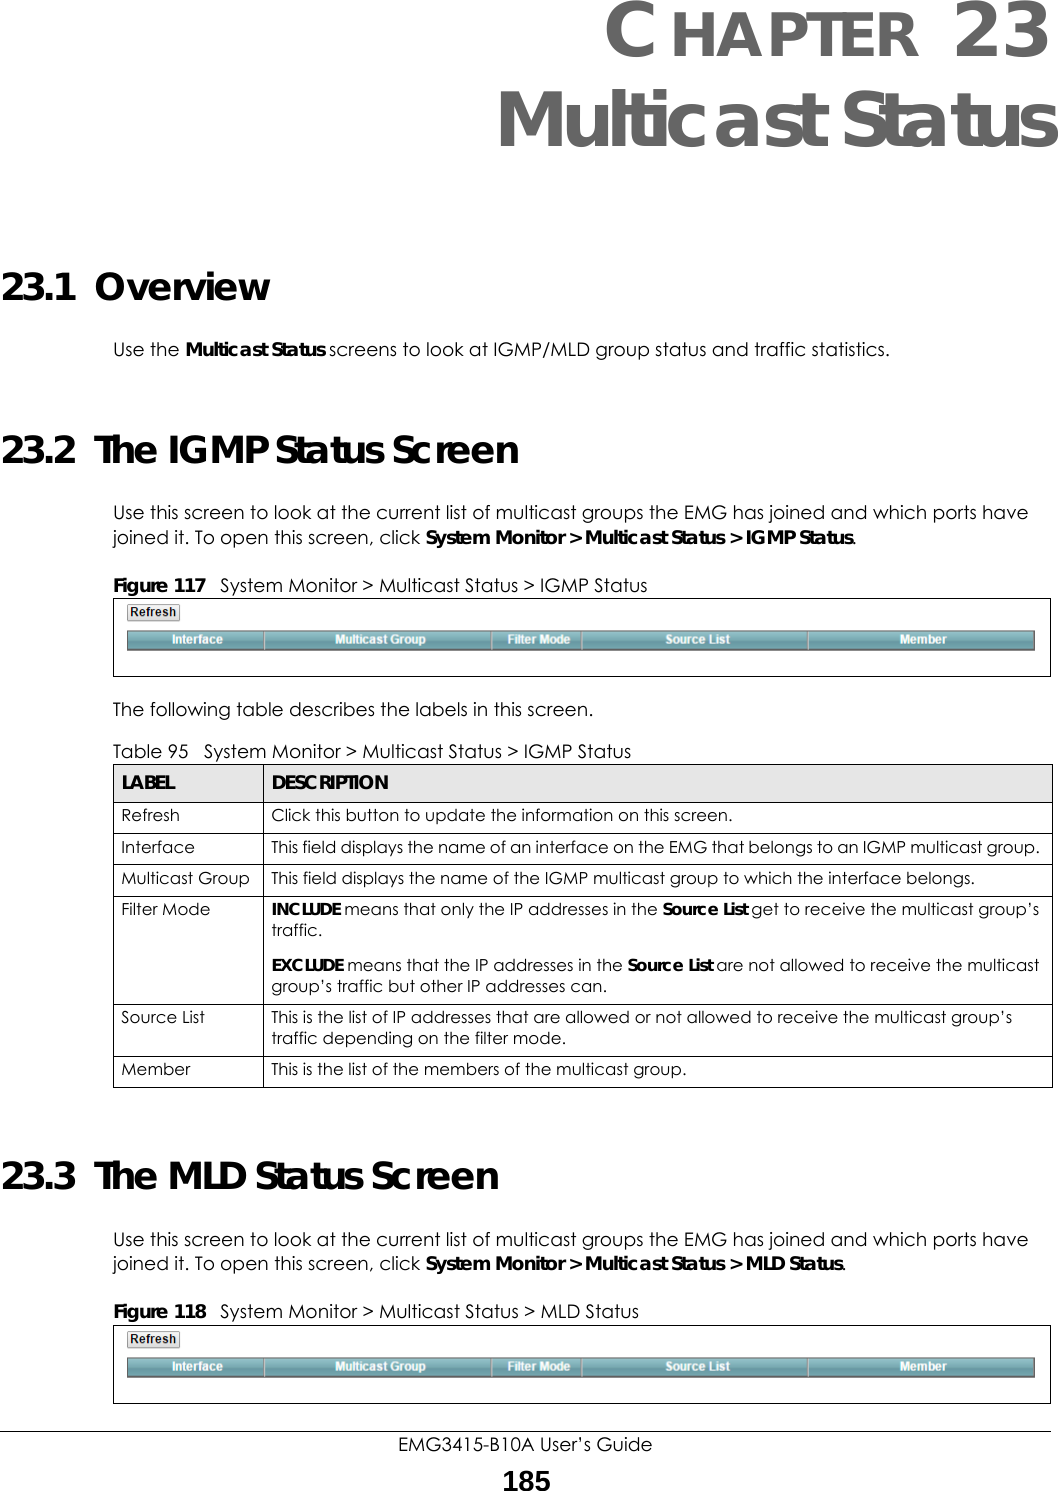 EMG3415-B10A User’s Guide185CHAPTER 23Multicast Status23.1  OverviewUse the Multicast Status screens to look at IGMP/MLD group status and traffic statistics. 23.2  The IGMP Status ScreenUse this screen to look at the current list of multicast groups the EMG has joined and which ports have joined it. To open this screen, click System Monitor &gt; Multicast Status &gt; IGMP Status.Figure 117   System Monitor &gt; Multicast Status &gt; IGMP StatusThe following table describes the labels in this screen.23.3  The MLD Status ScreenUse this screen to look at the current list of multicast groups the EMG has joined and which ports have joined it. To open this screen, click System Monitor &gt; Multicast Status &gt; MLD Status.Figure 118   System Monitor &gt; Multicast Status &gt; MLD StatusTable 95   System Monitor &gt; Multicast Status &gt; IGMP StatusLABEL DESCRIPTIONRefresh Click this button to update the information on this screen.Interface This field displays the name of an interface on the EMG that belongs to an IGMP multicast group. Multicast Group This field displays the name of the IGMP multicast group to which the interface belongs. Filter Mode  INCLUDE means that only the IP addresses in the Source List get to receive the multicast group’s traffic.EXCLUDE means that the IP addresses in the Source List are not allowed to receive the multicast group’s traffic but other IP addresses can.Source List This is the list of IP addresses that are allowed or not allowed to receive the multicast group’s traffic depending on the filter mode.Member This is the list of the members of the multicast group.